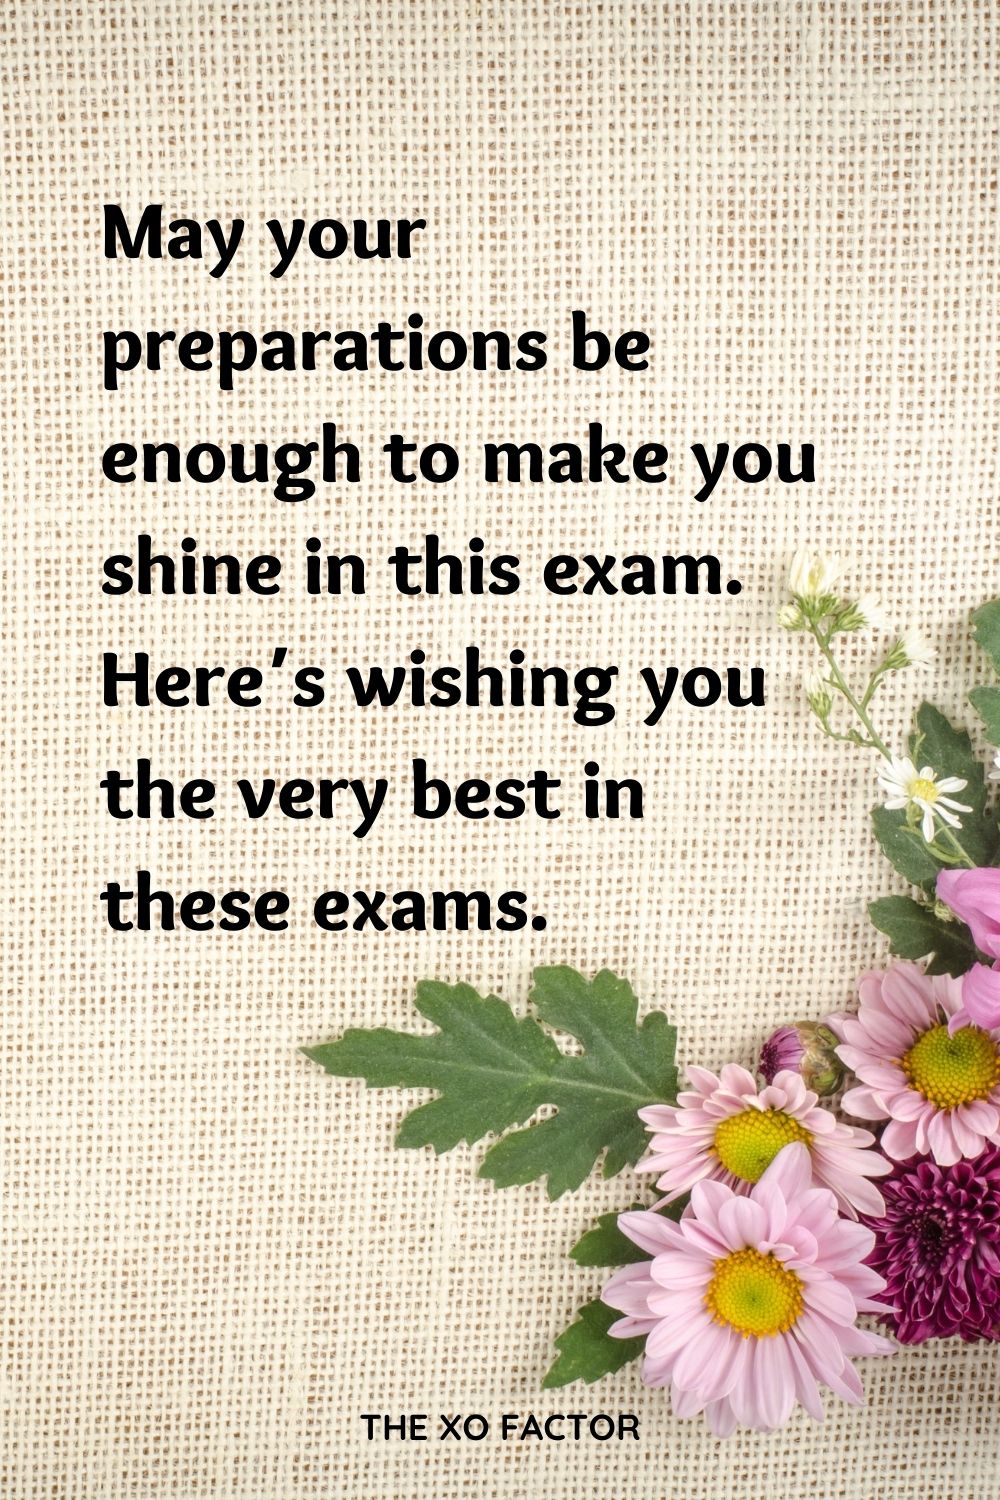 May your preparations be enough to make you shine in this exam. Here’s wishing you the very best in these exams.